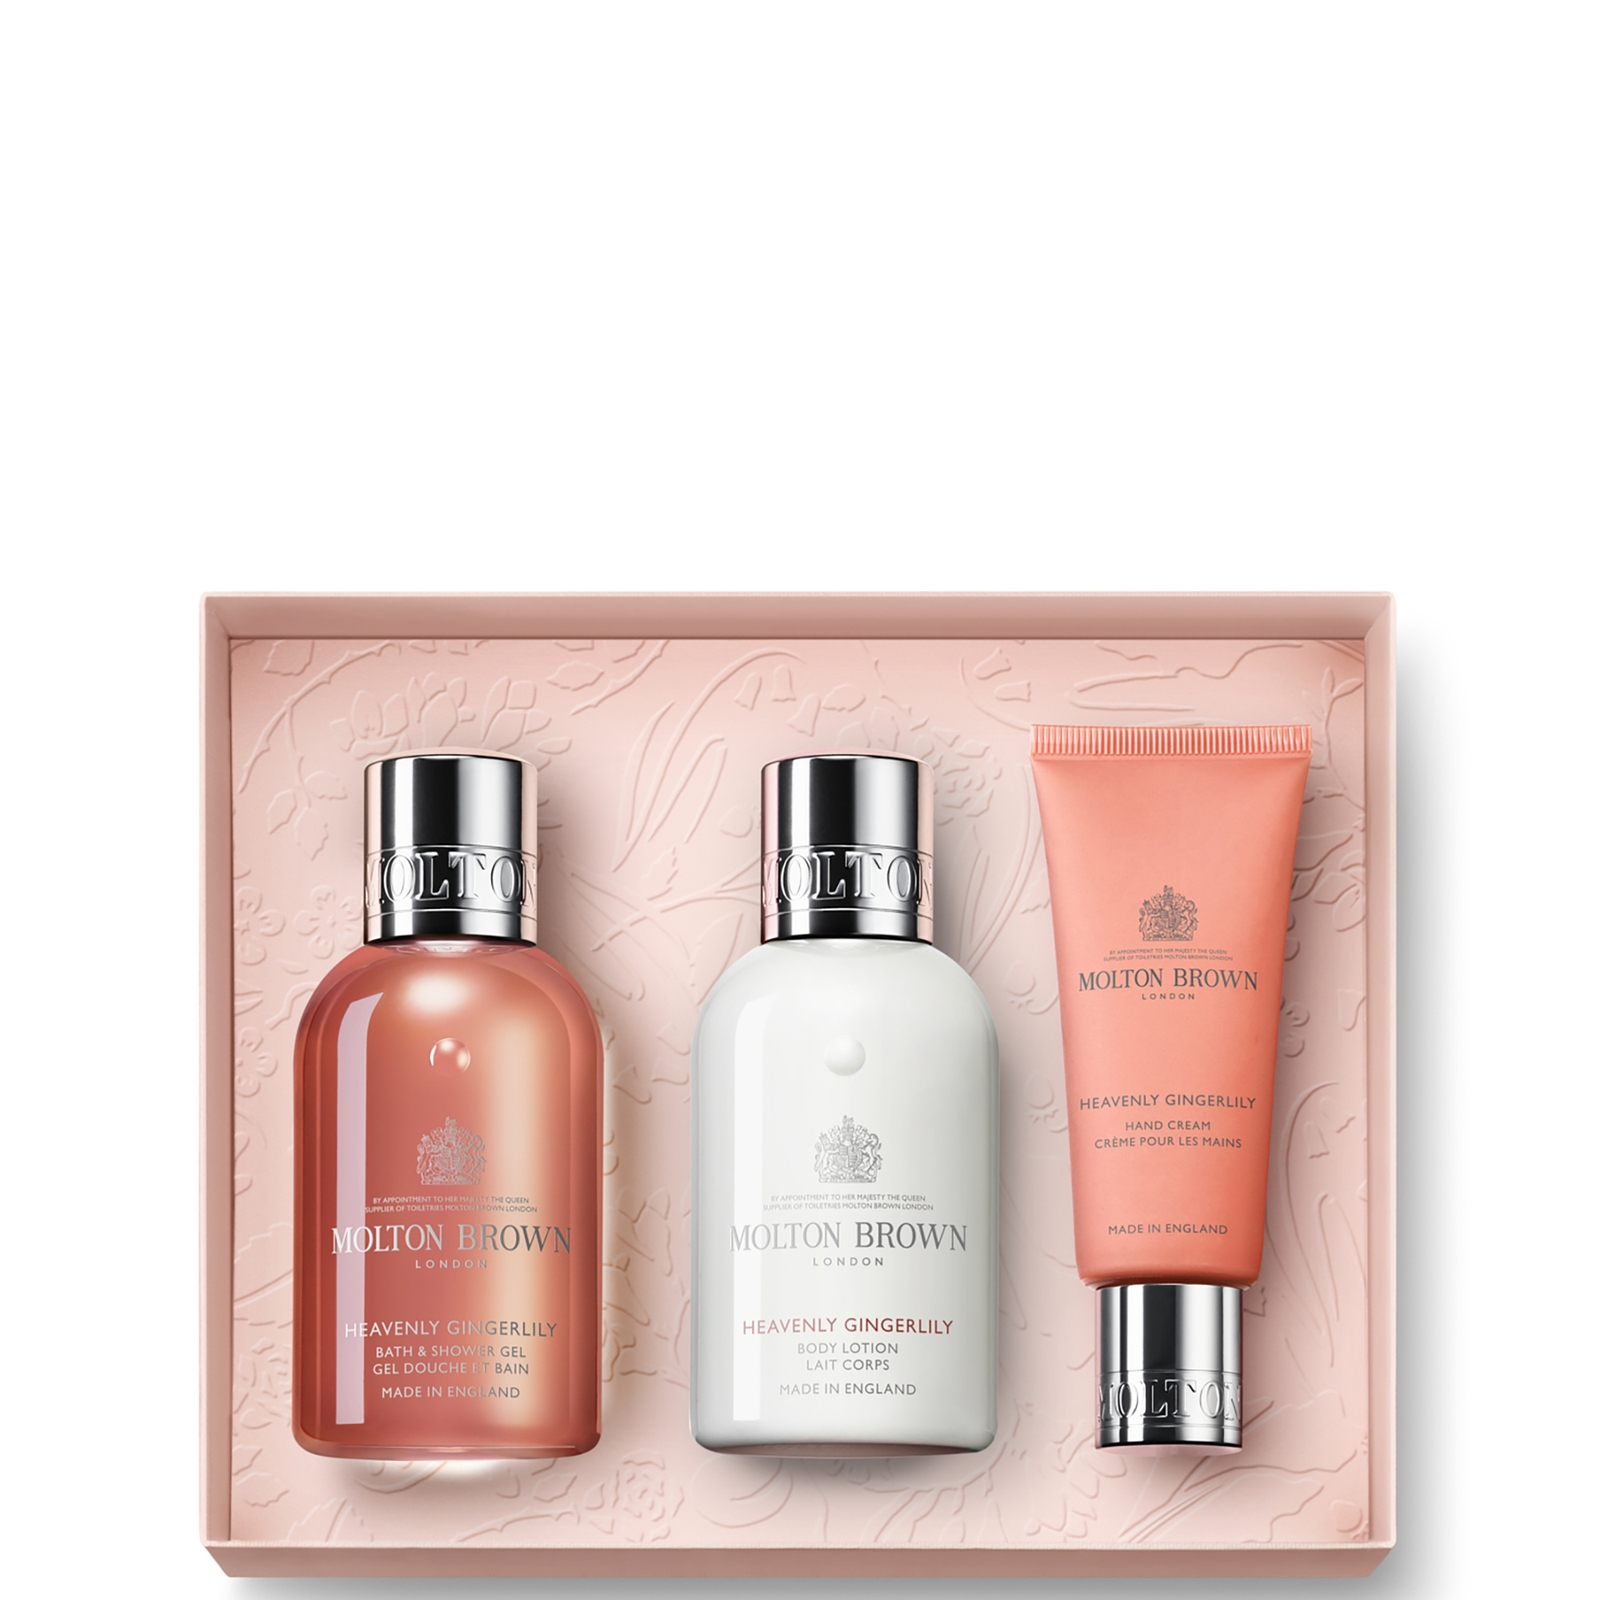 Molton Brown Heavenly Gingerlily Travel Body and Hand Collection